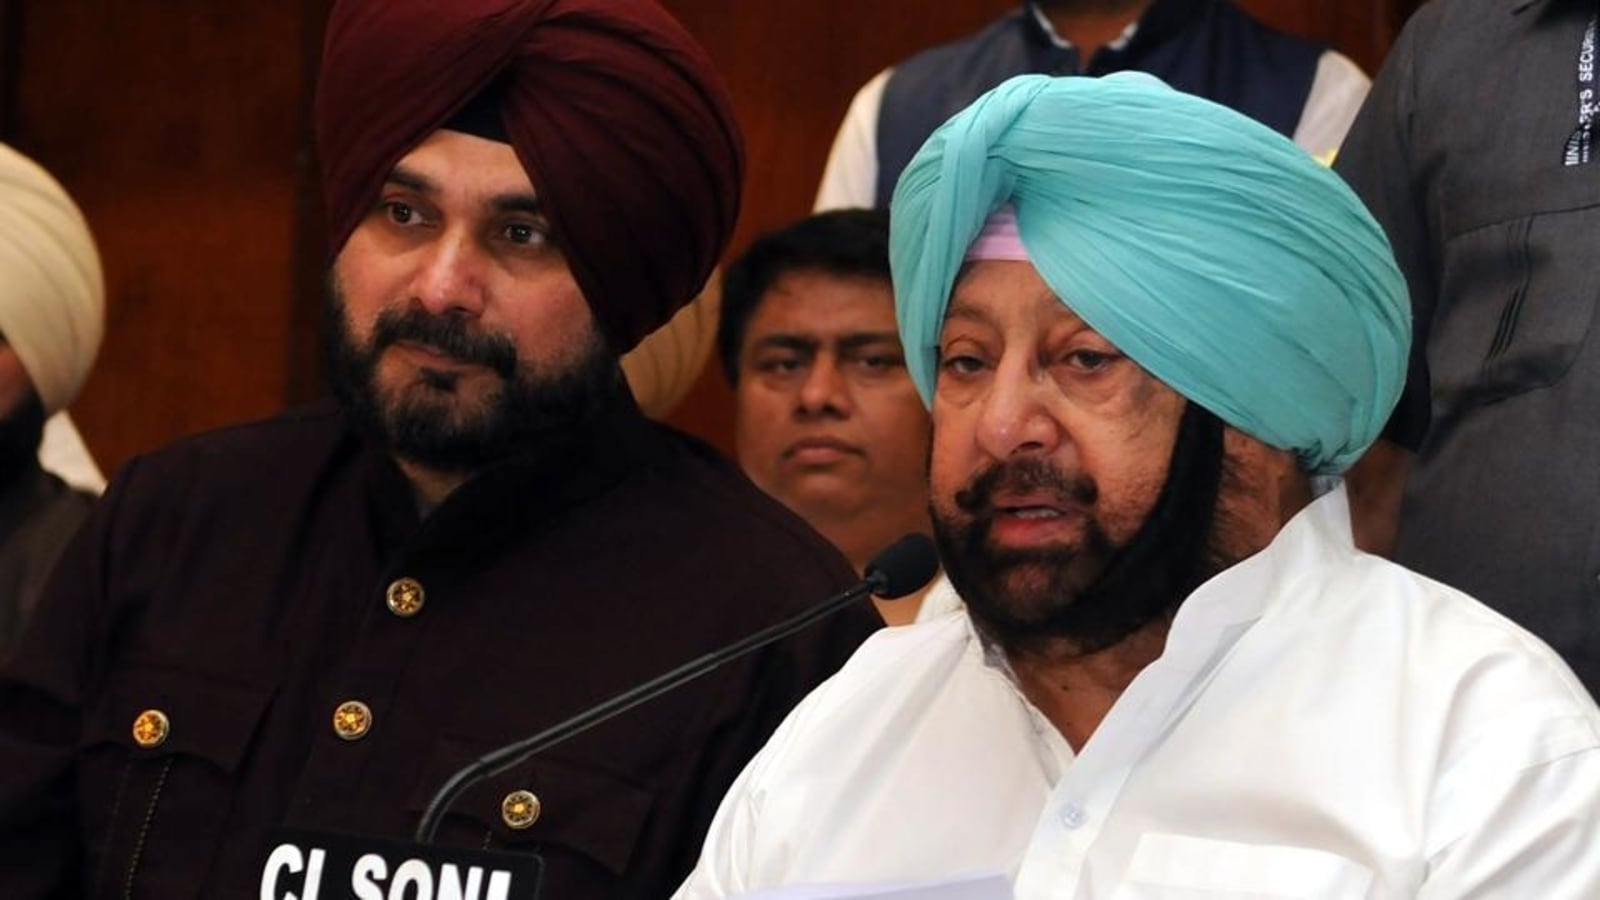 Not a stable man', tweets Amarinder Singh after Navjot Sidhu's resignation | Latest News India - Hindustan Times